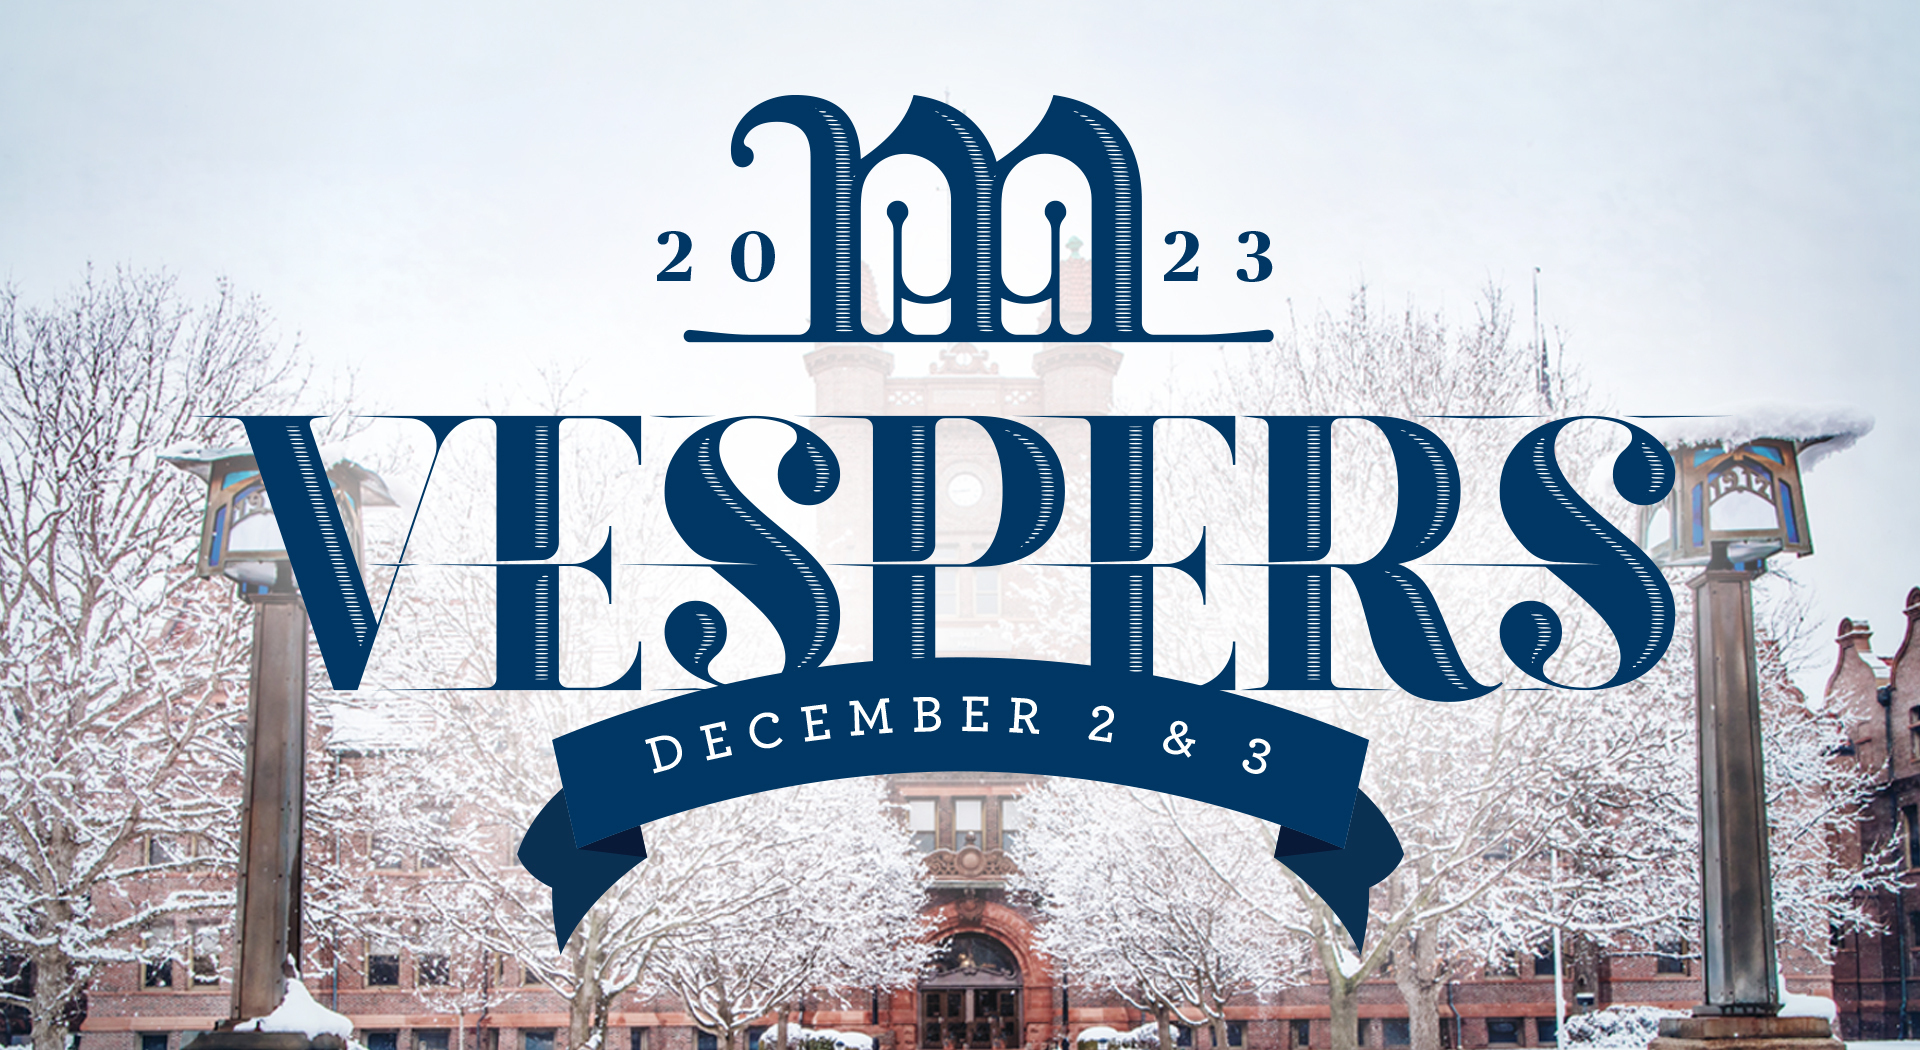 Vespers, presented by the Millikin School of Music, Decatur, Illinois, United States